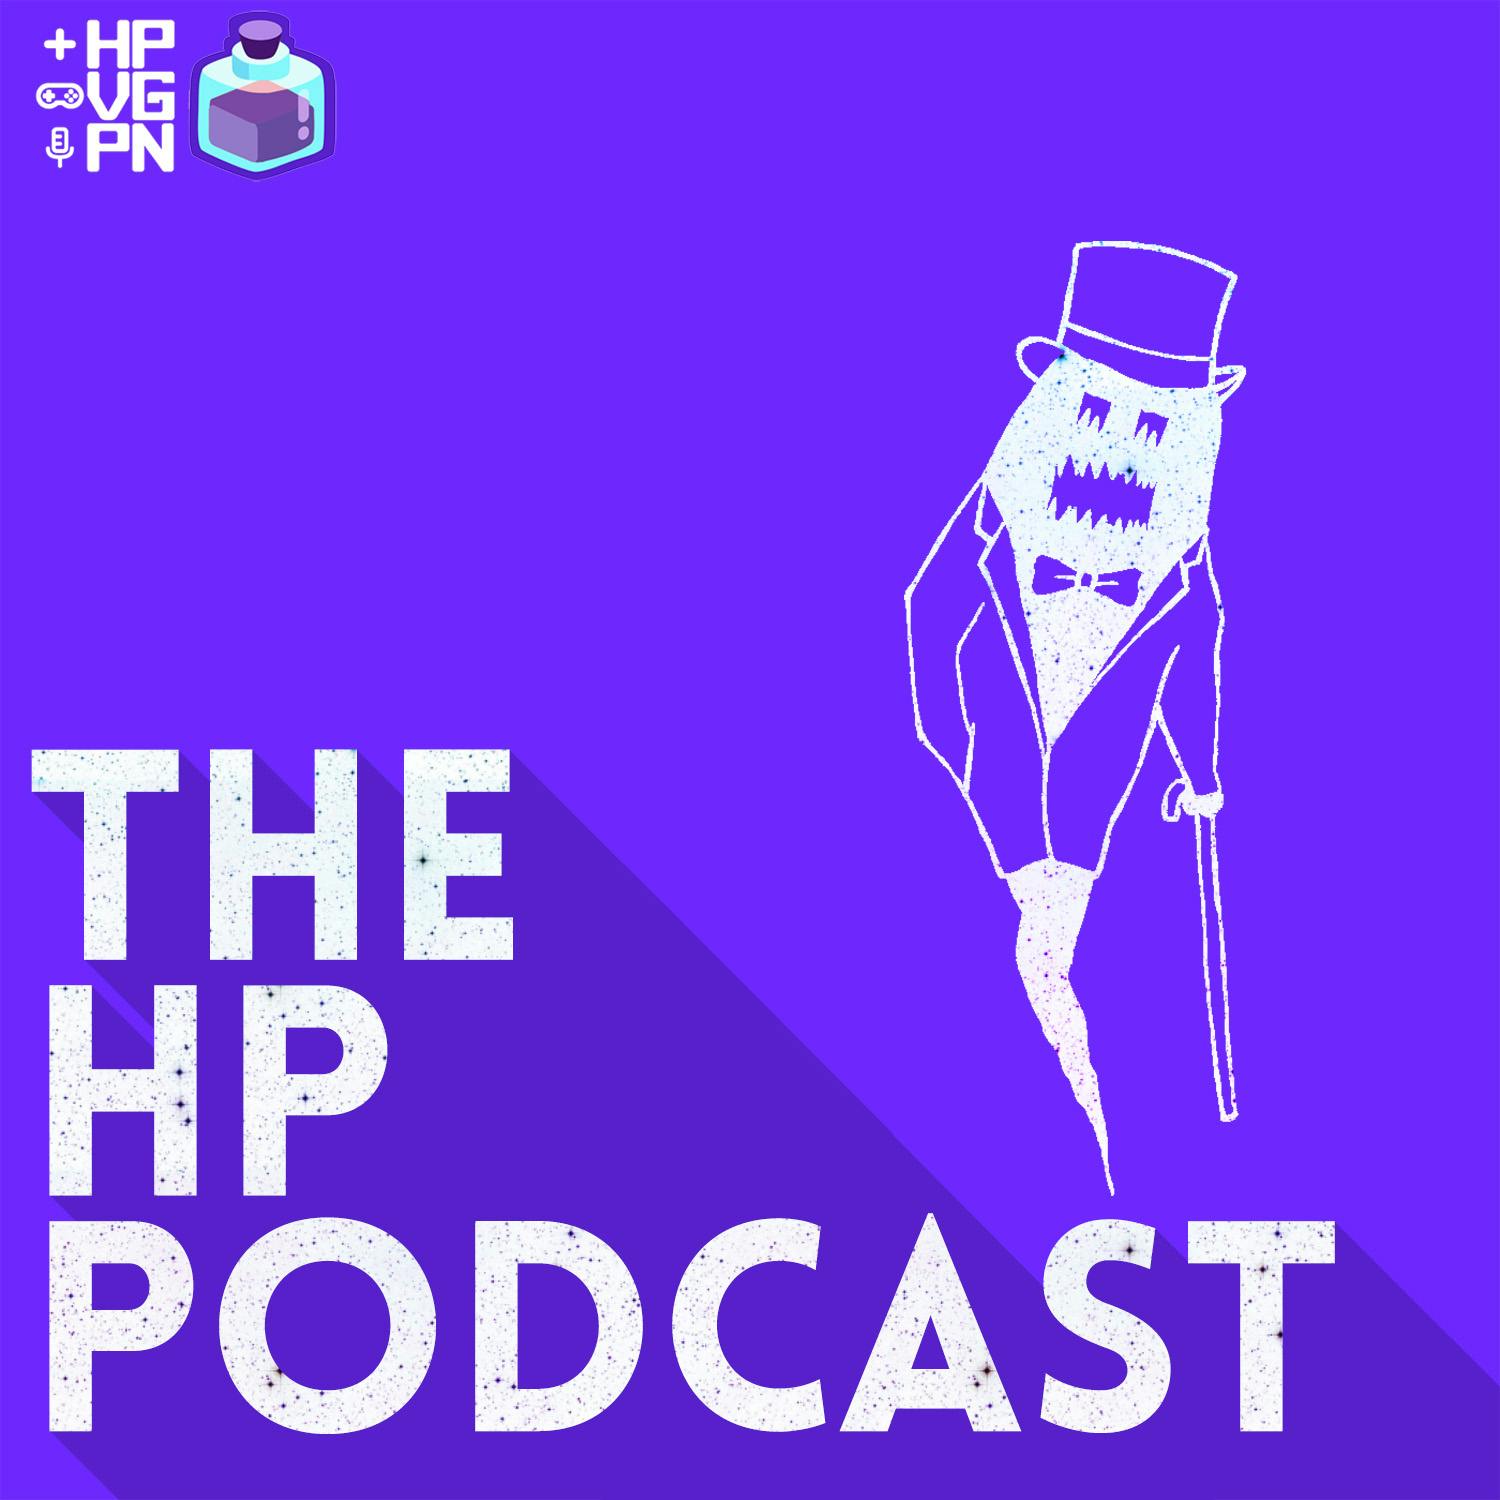 PlayStation 5’s UI is Finally Revealed - The HP Podcast Episode #92